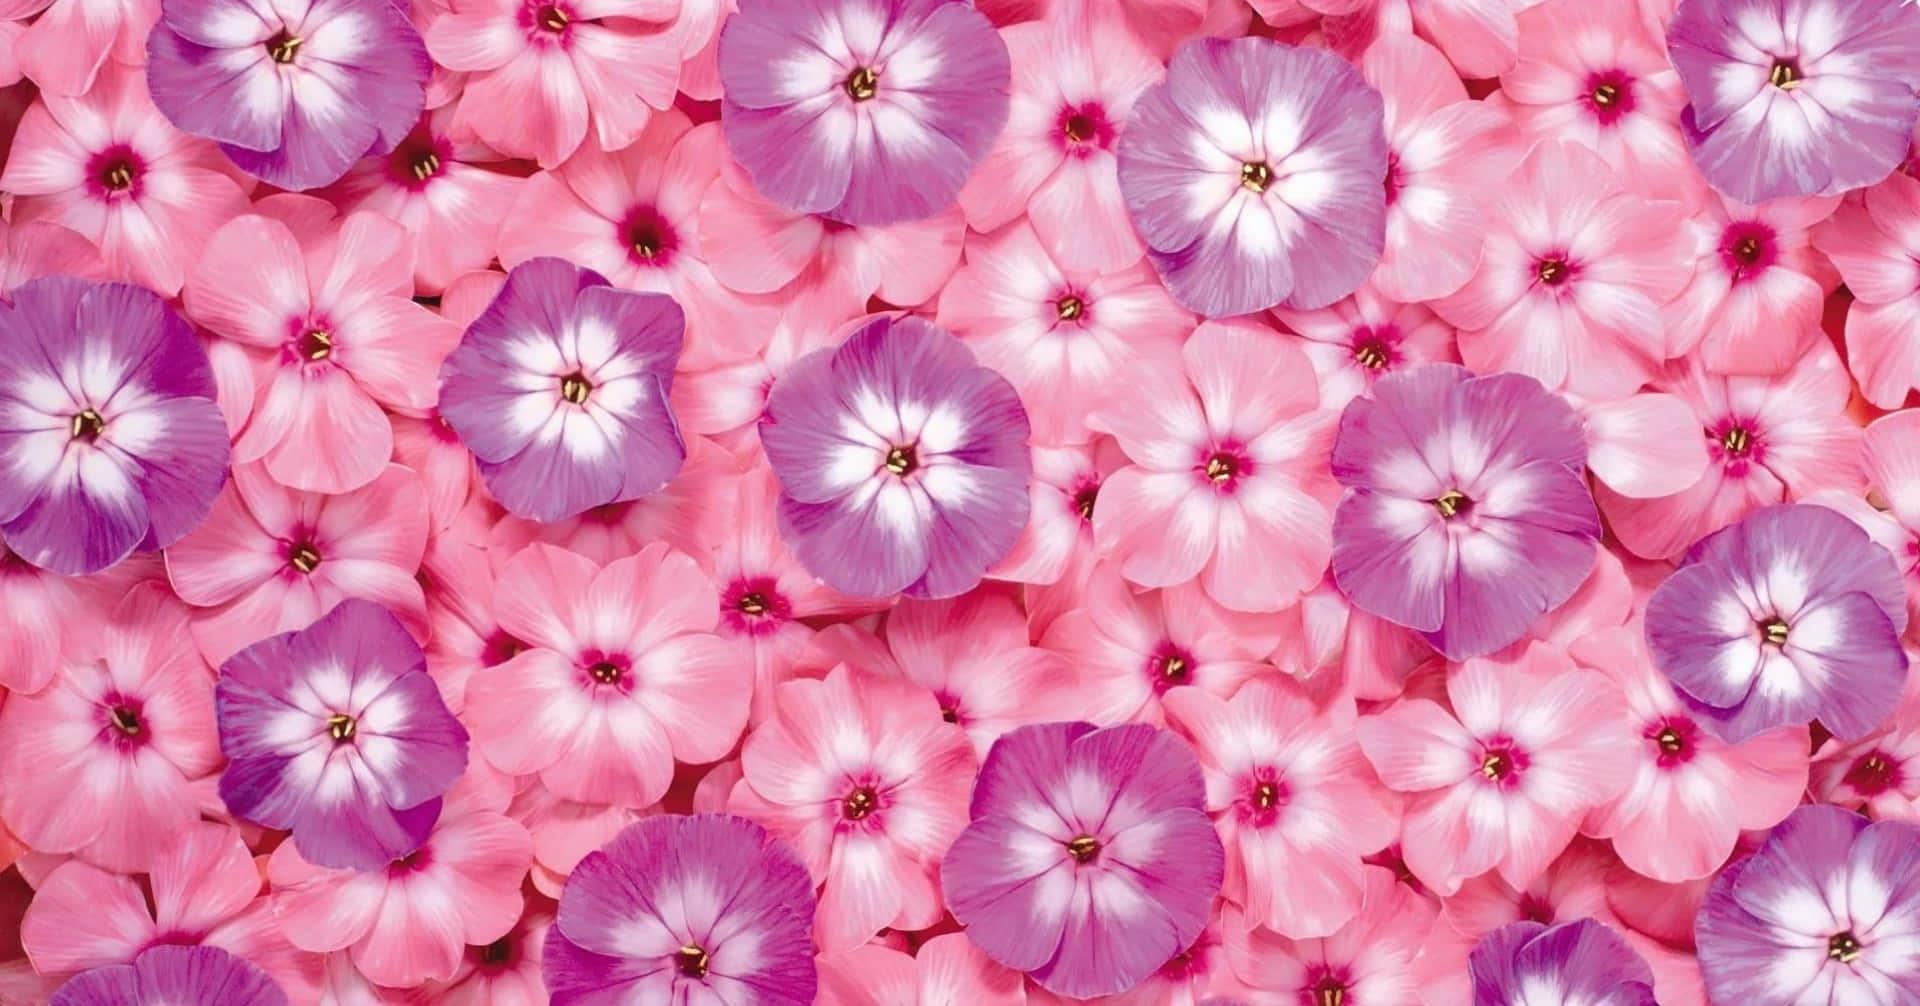 Cute Purple and Pink Wallpapers - Top Free Cute Purple and Pink ...